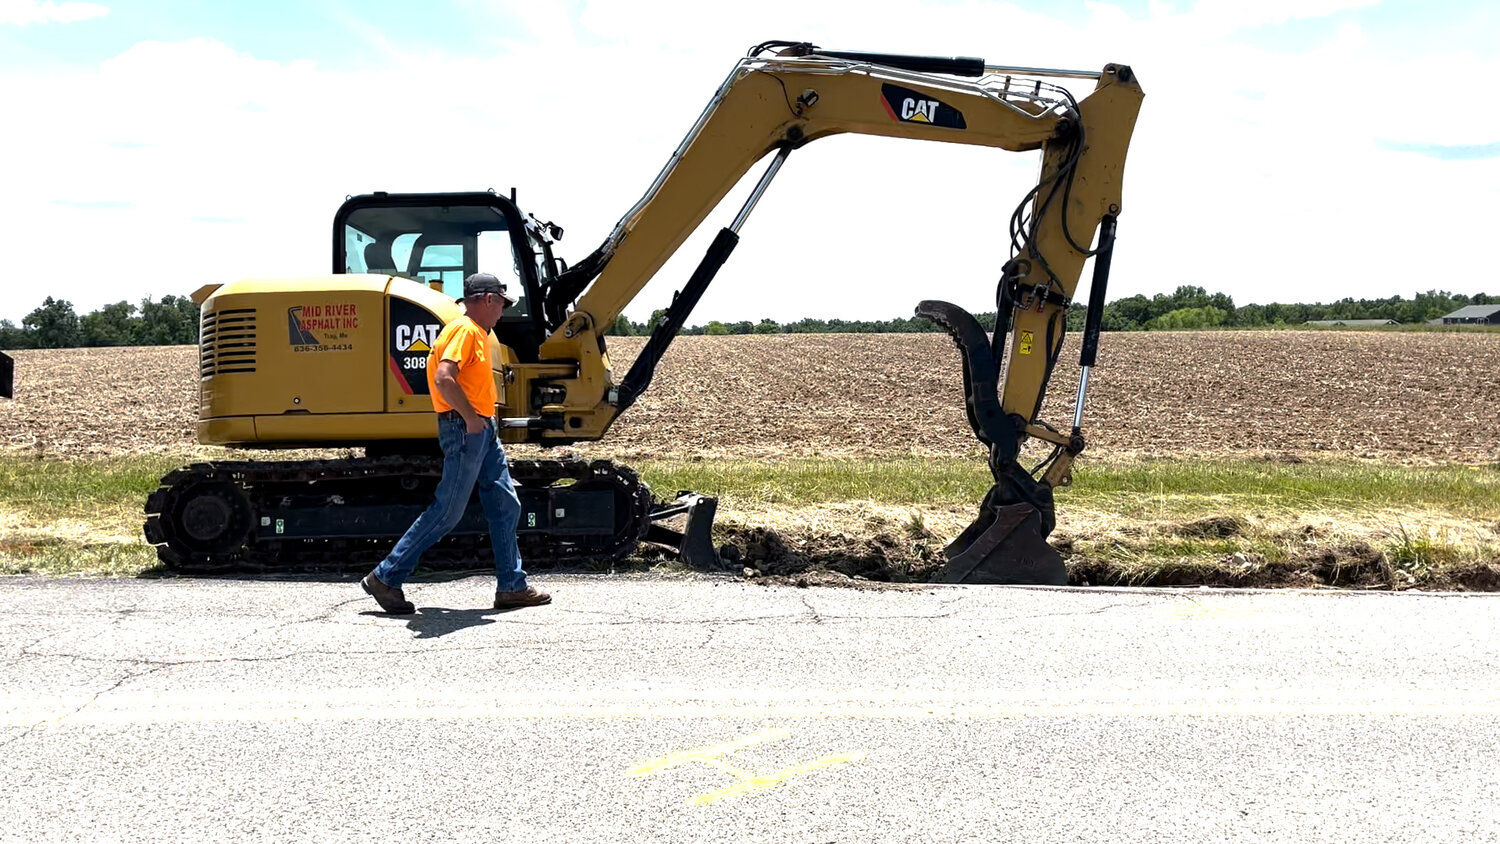 Heavy machinery was used to repair Stuermann Road in Wright City. The last part of the major road construction project is to add a double yellow stripe to the new road.